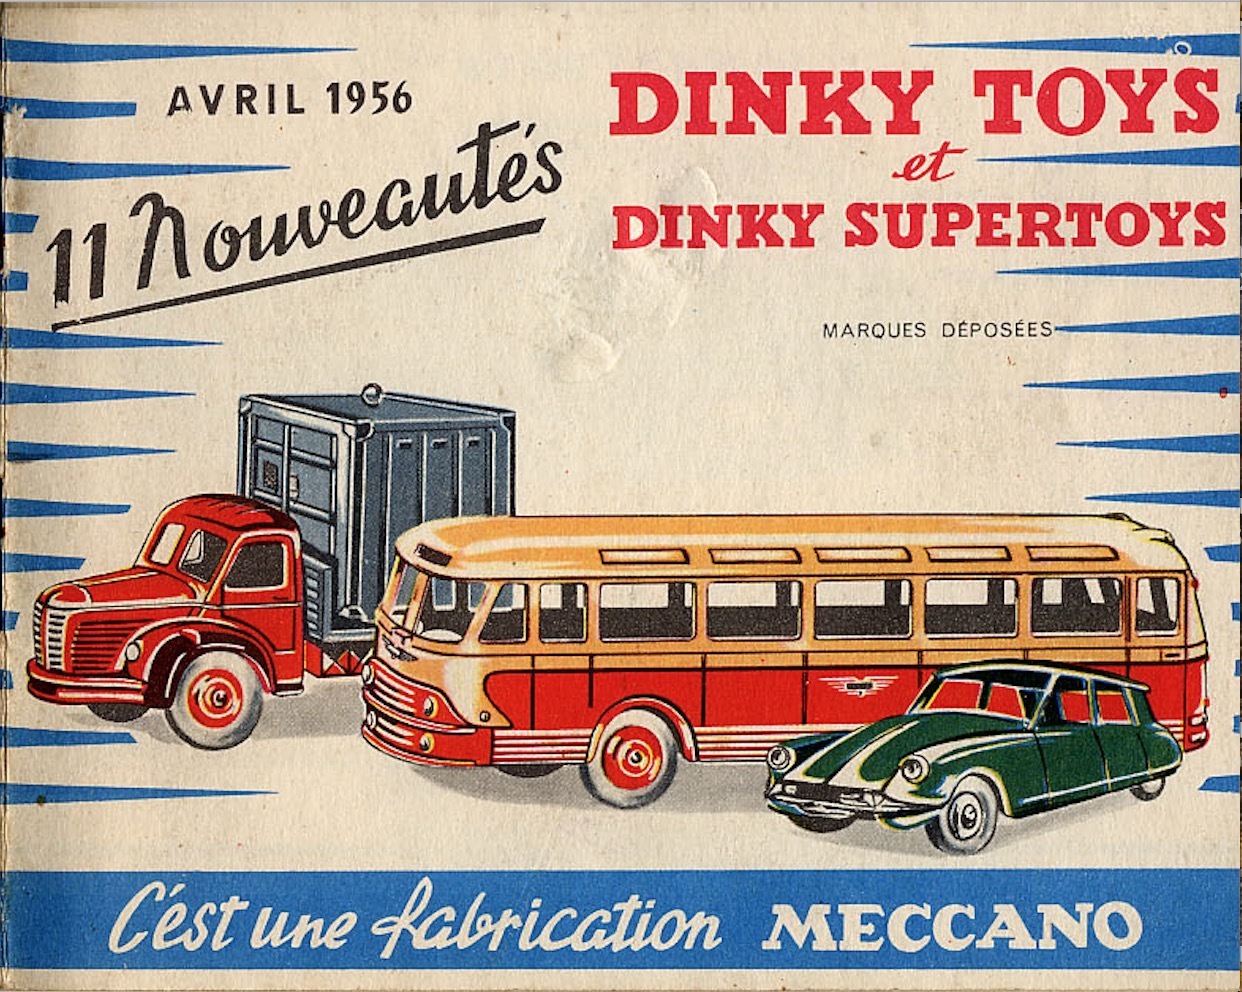 dinky_toys_catalog_1956_28french_29_brochures_and_catalogs_9a7687b3-078e-4b2a-82f4-a138d91910bb.jpg